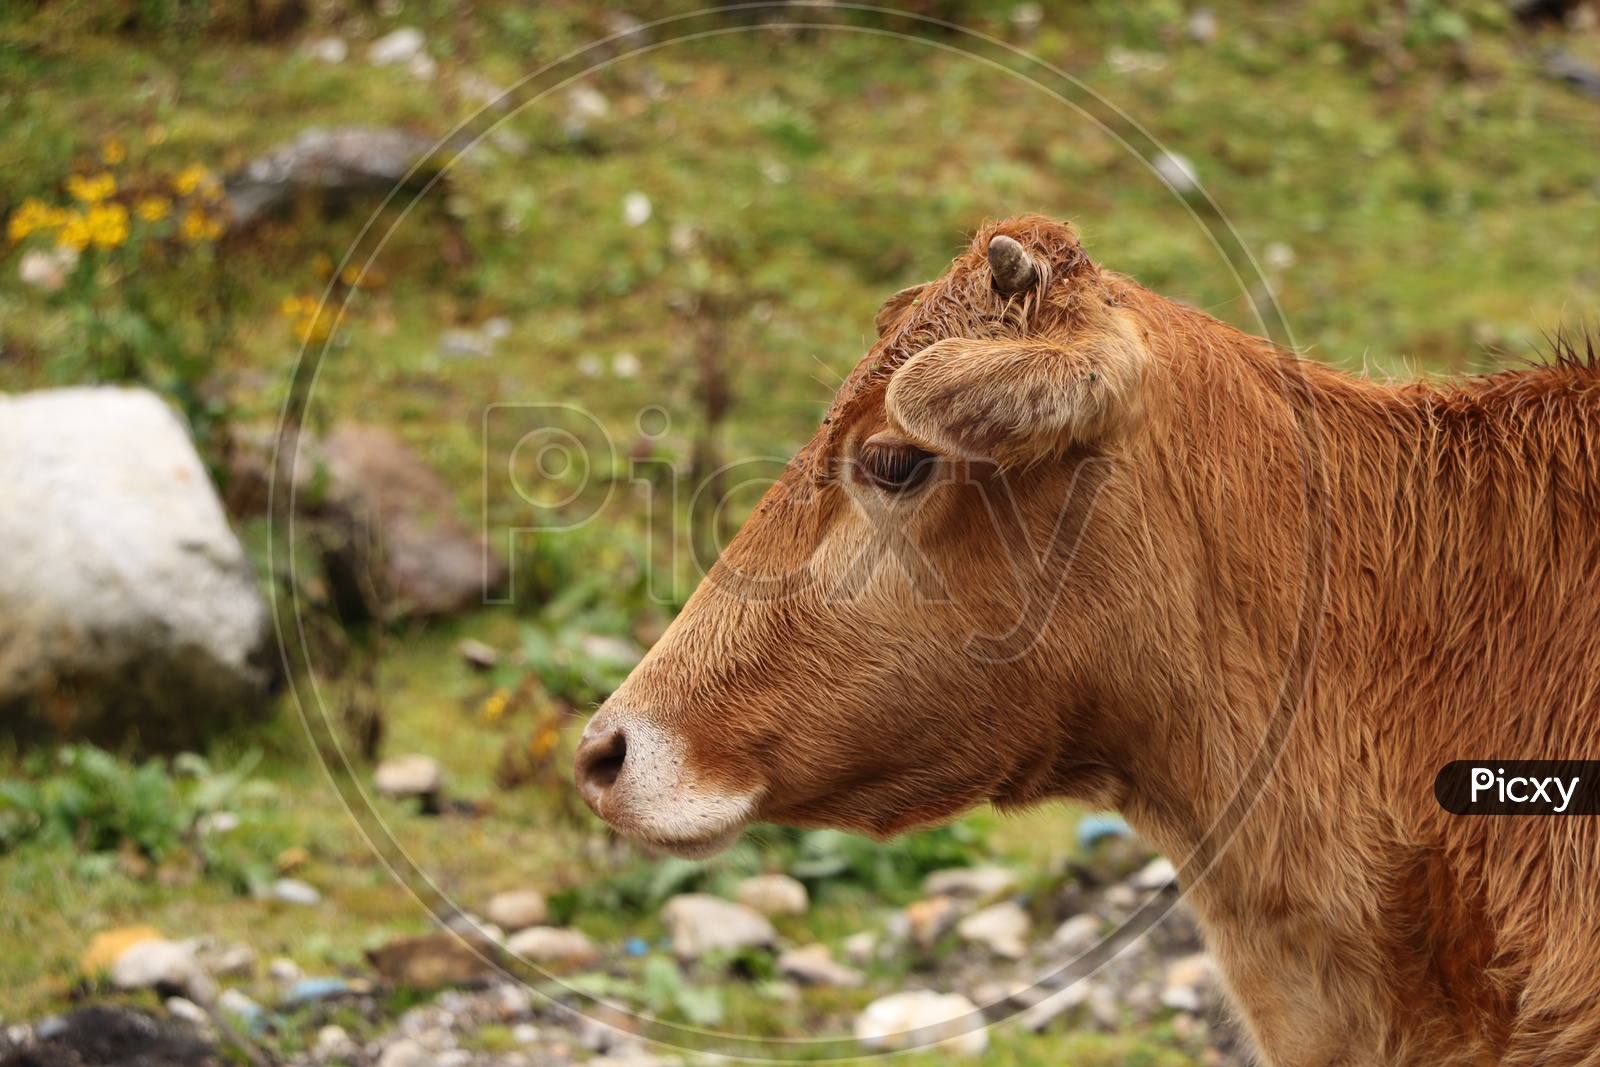 A cow in the pasture